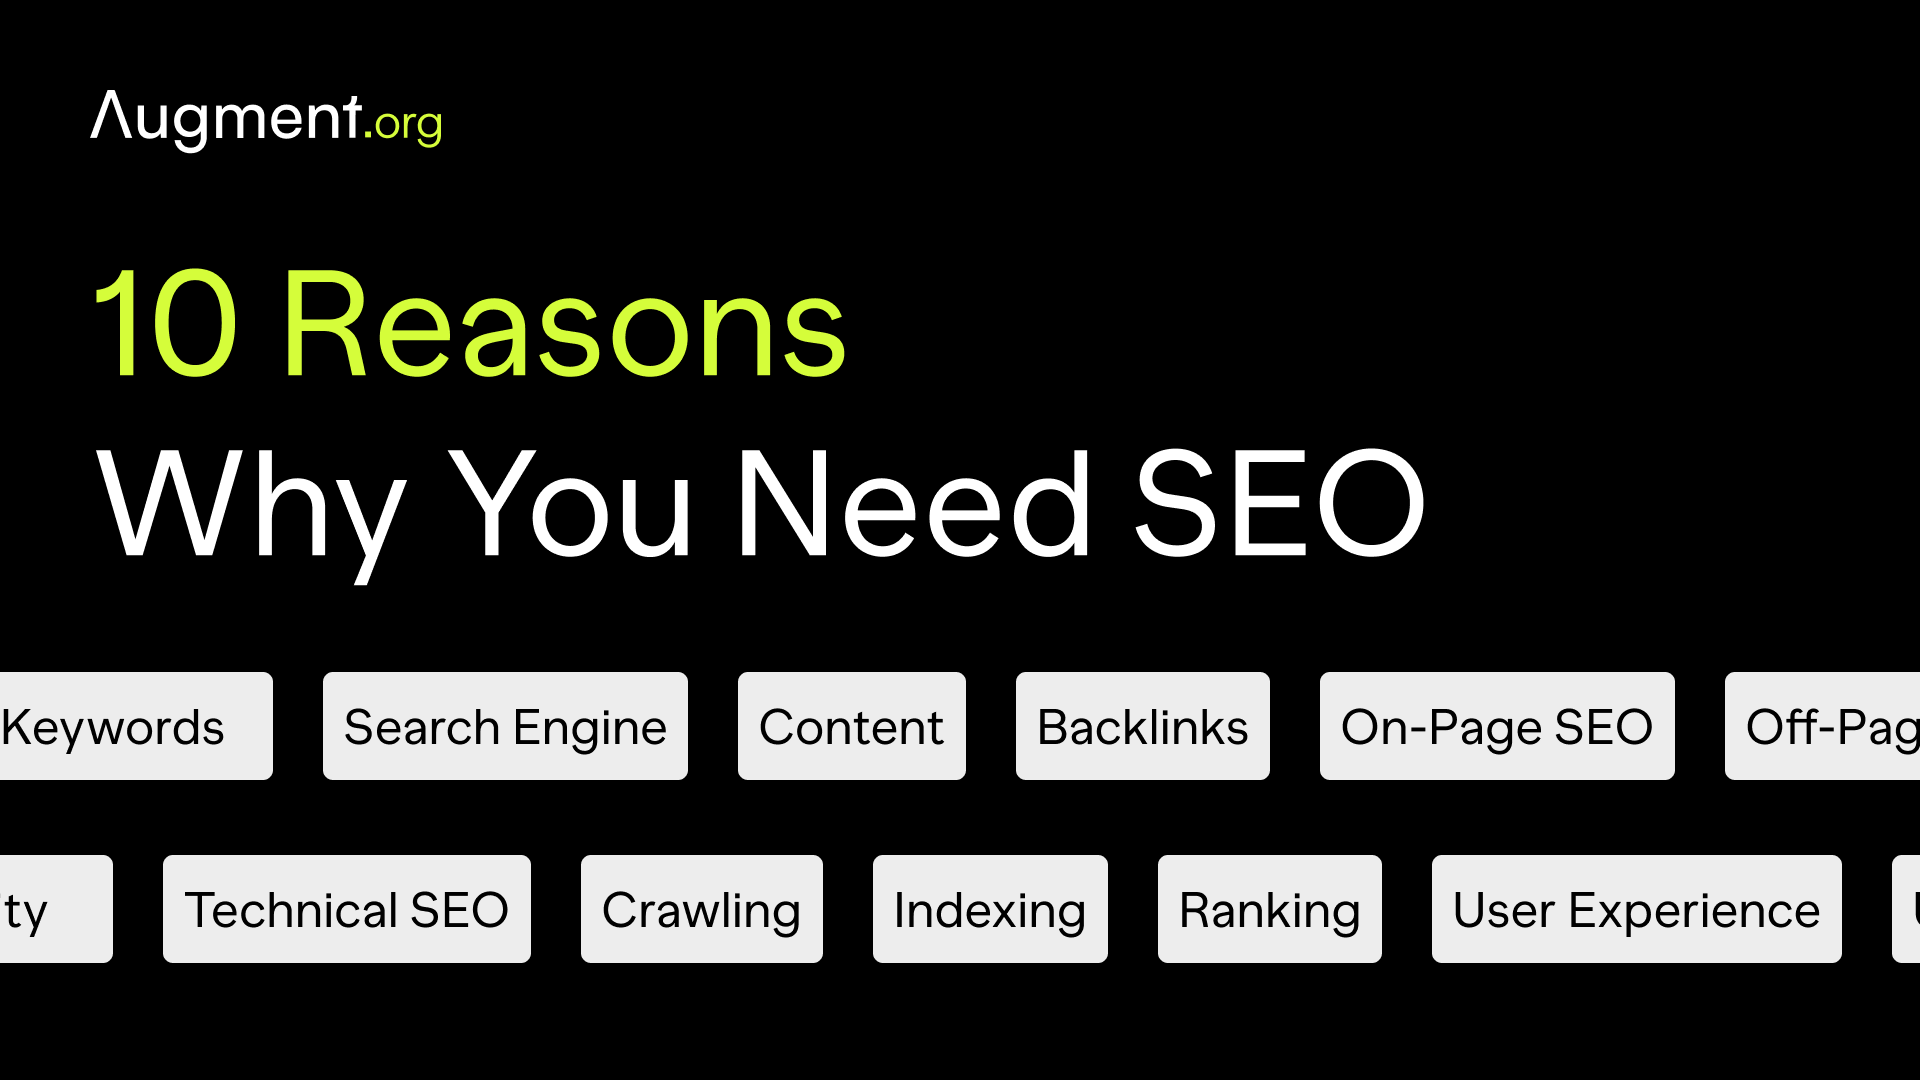 Why SEO is Important for Business: 10 Reasons You Need SEO